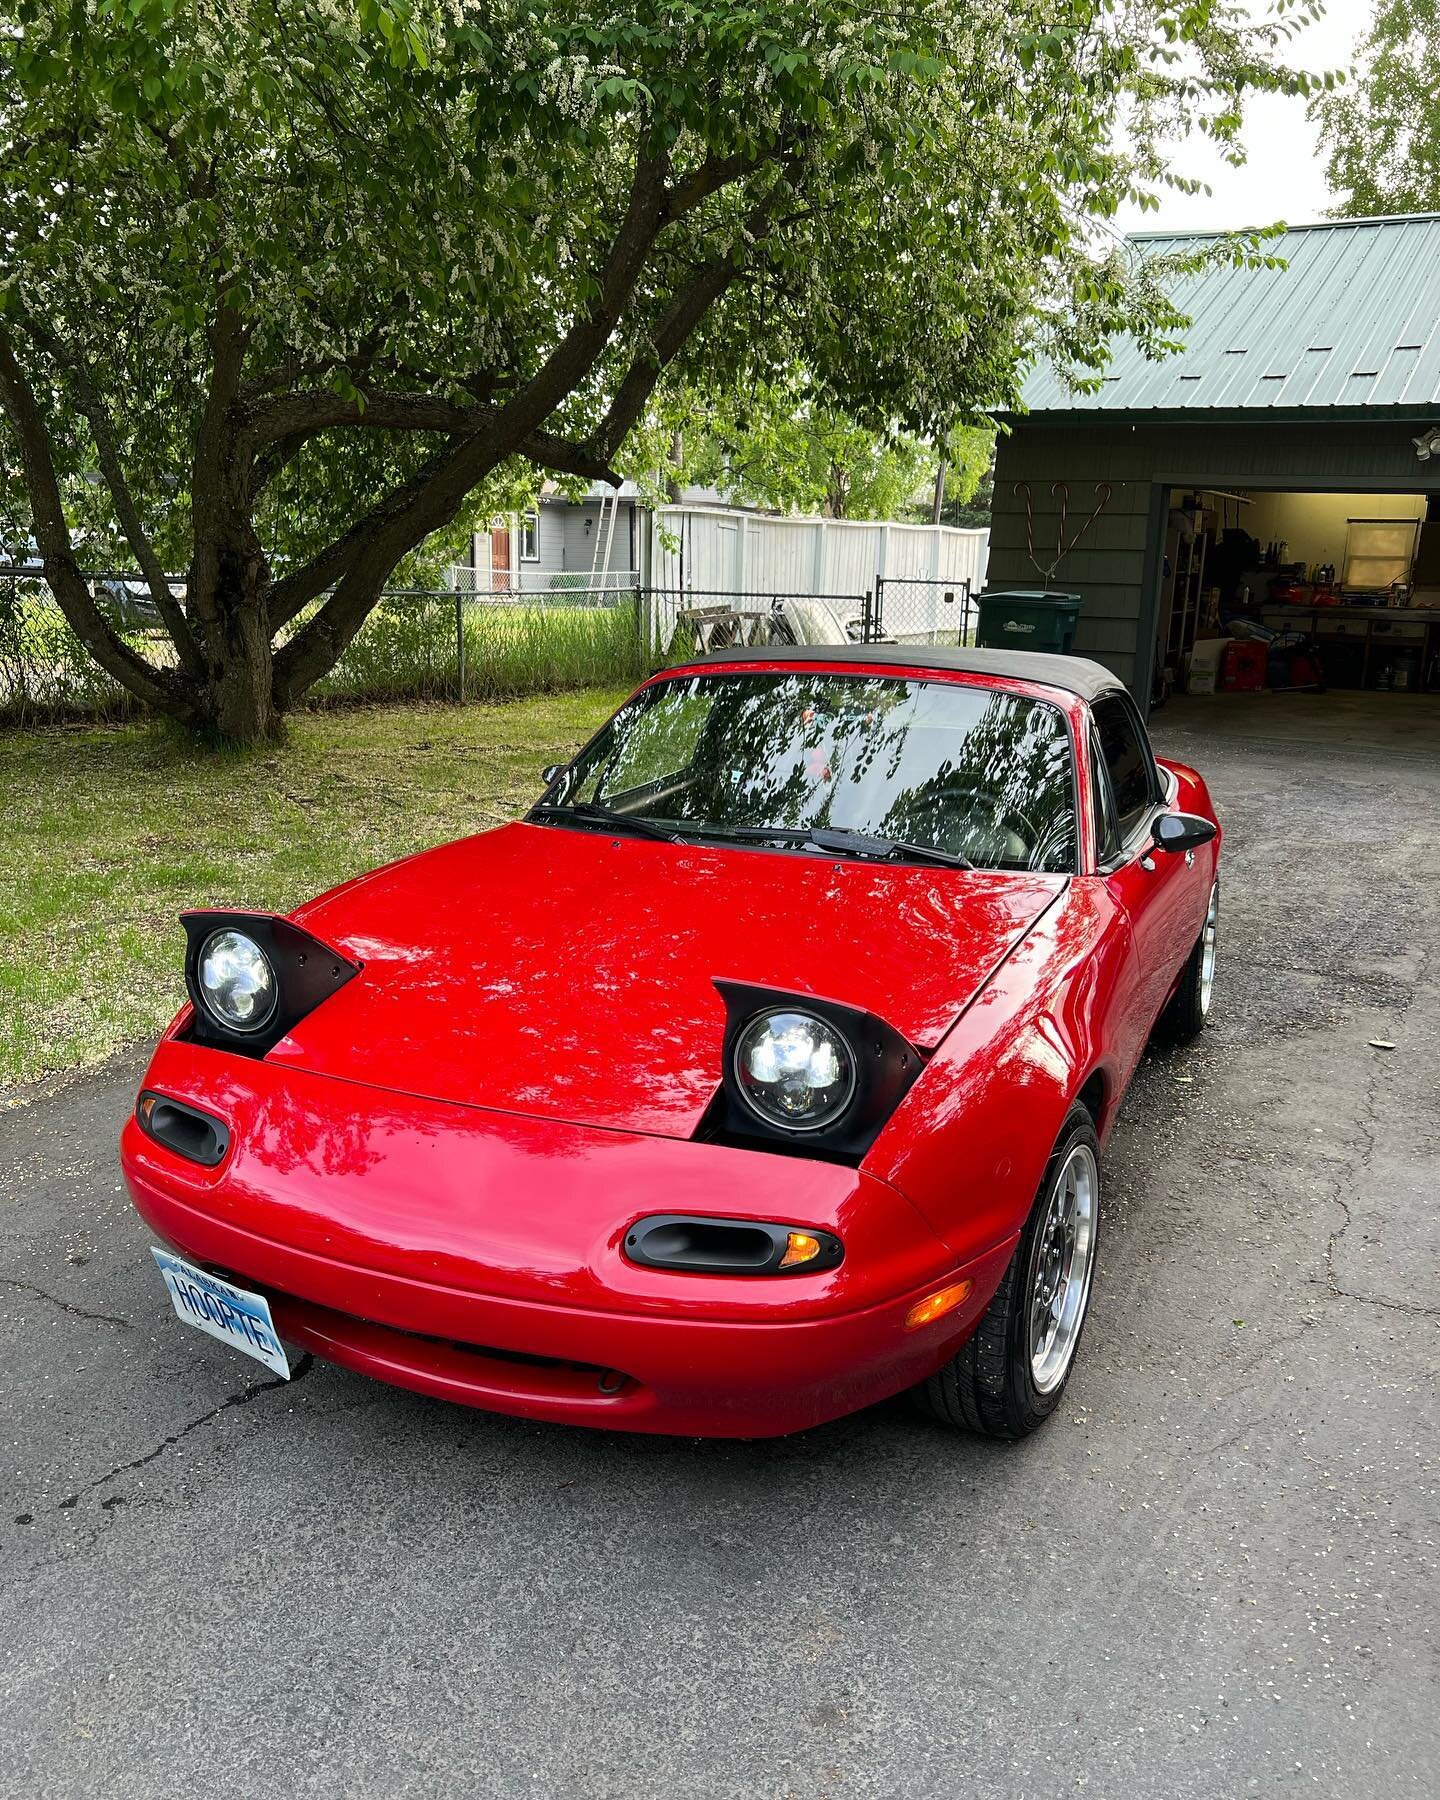 This miata came in for an emergency paint correction just in time for @rev_alaska !!! Make sure to check it out. 
.
.
.
#revalaska #akracewars #cardetailing #autodetailing #paintcorrection #detailing #jdm #alaska #alaskacarscene #anchorage #anchorage